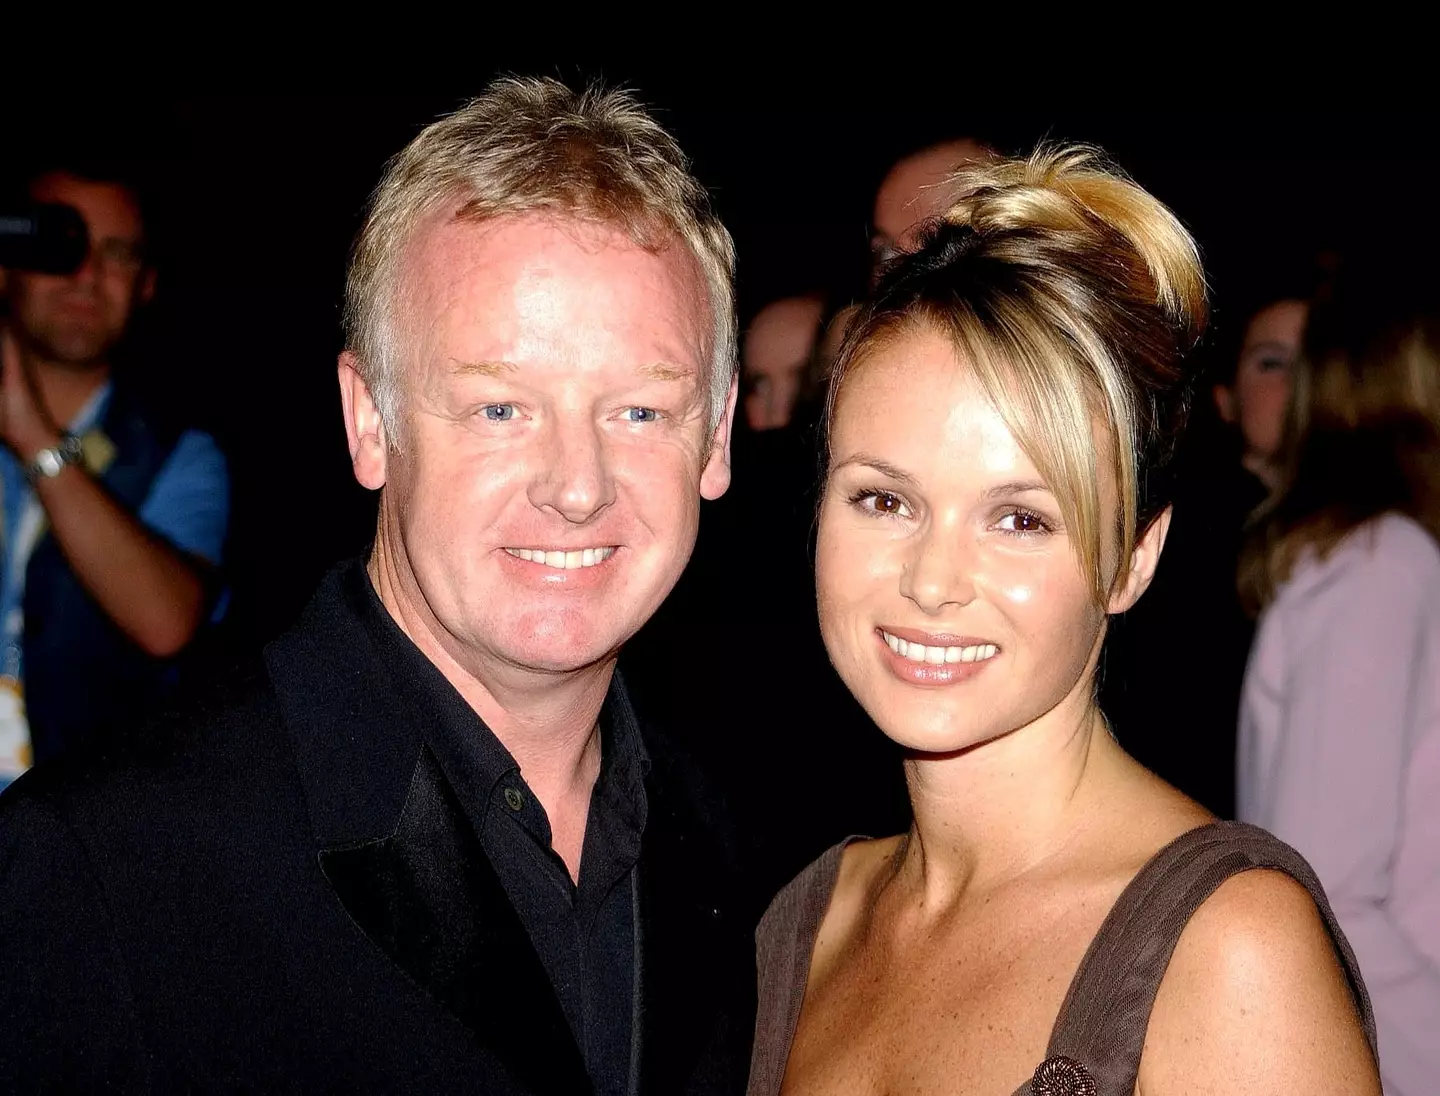 Les Dennis and Amanda Holden separated in 2003 after Holden's affair with Neil Morrissey.